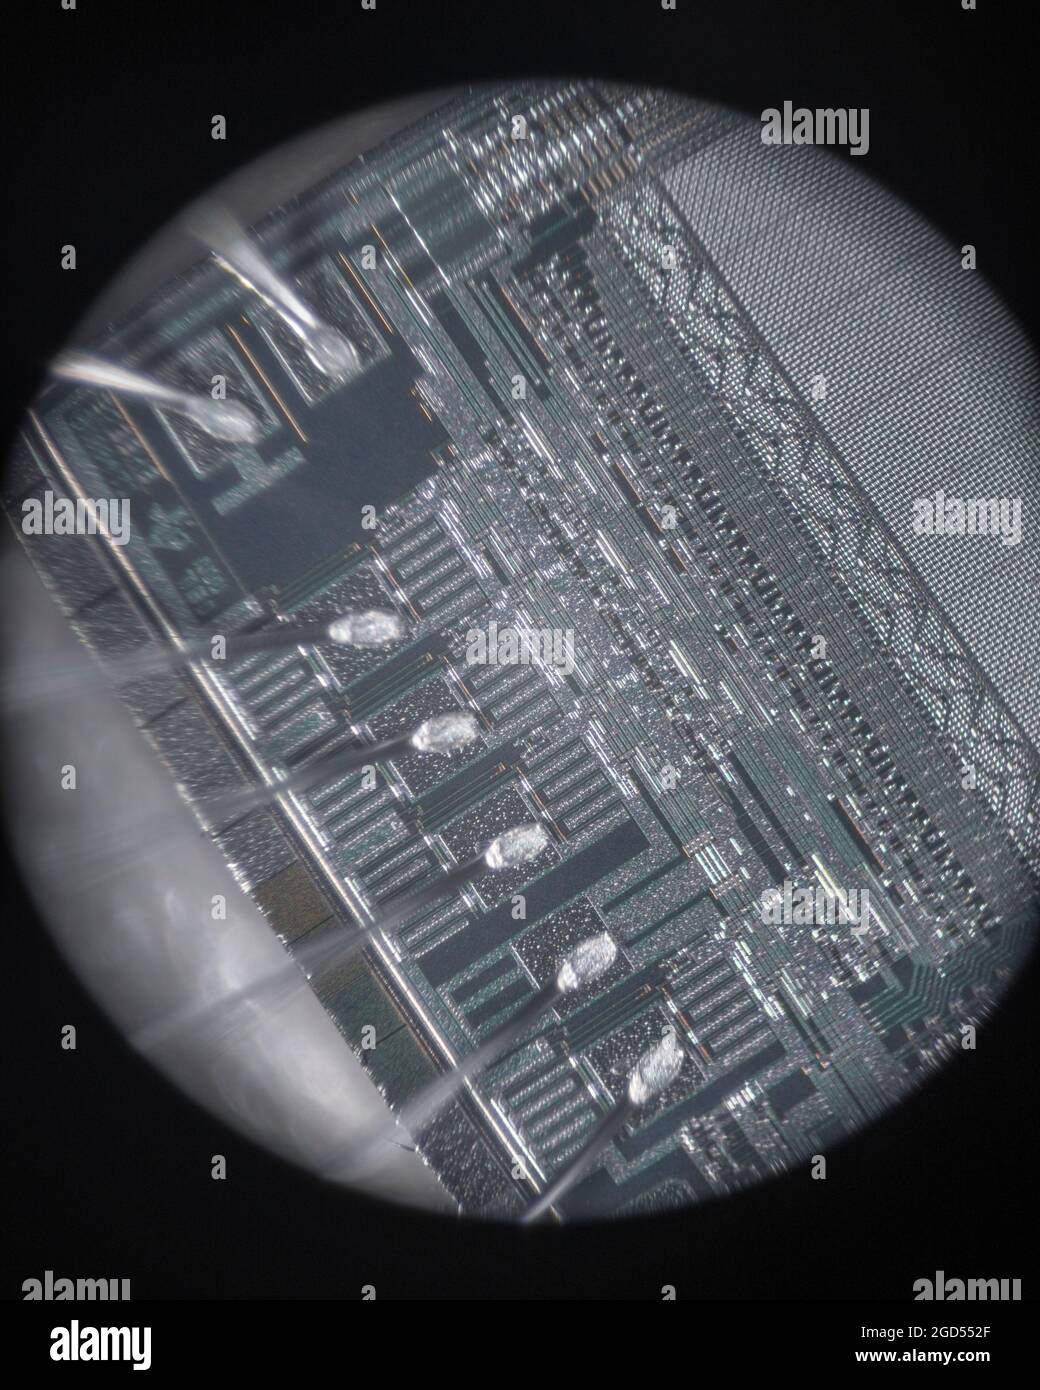 Microphotograph of internal wiring and die of Texas Instruments TMS 2532A-45JL UV eprom. Taken through a 10x standard microscope objective. SEE NOTES Stock Photo